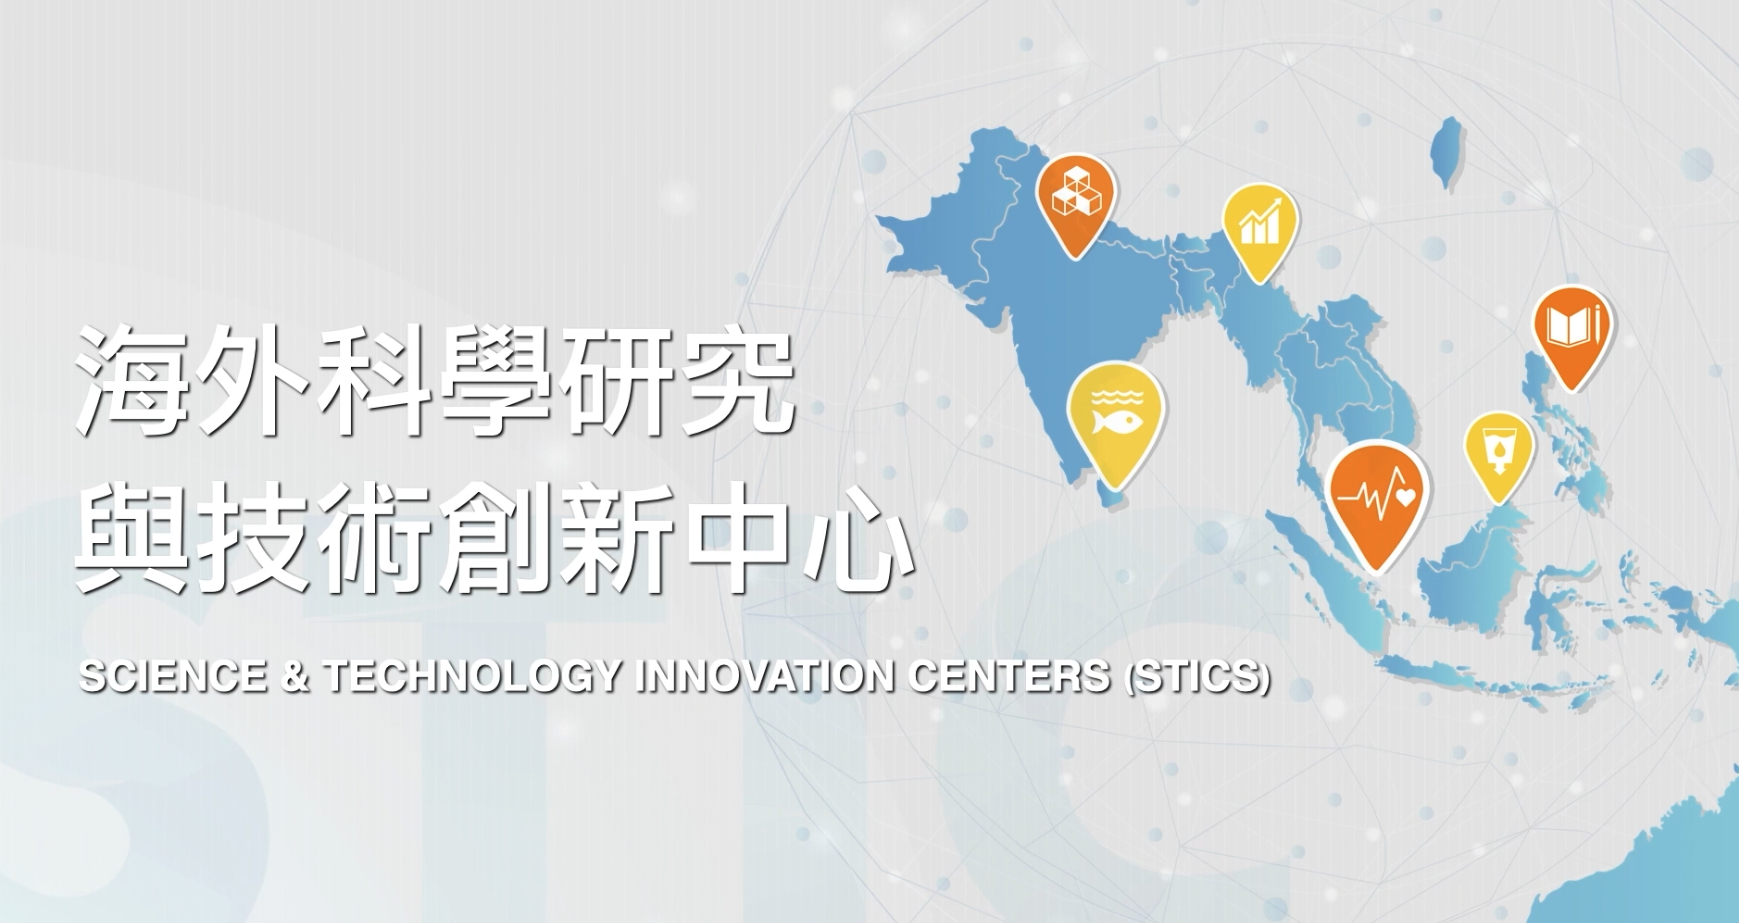 Introduction of 2020 Science & Technology Innovation Centers (STICs)'s picture